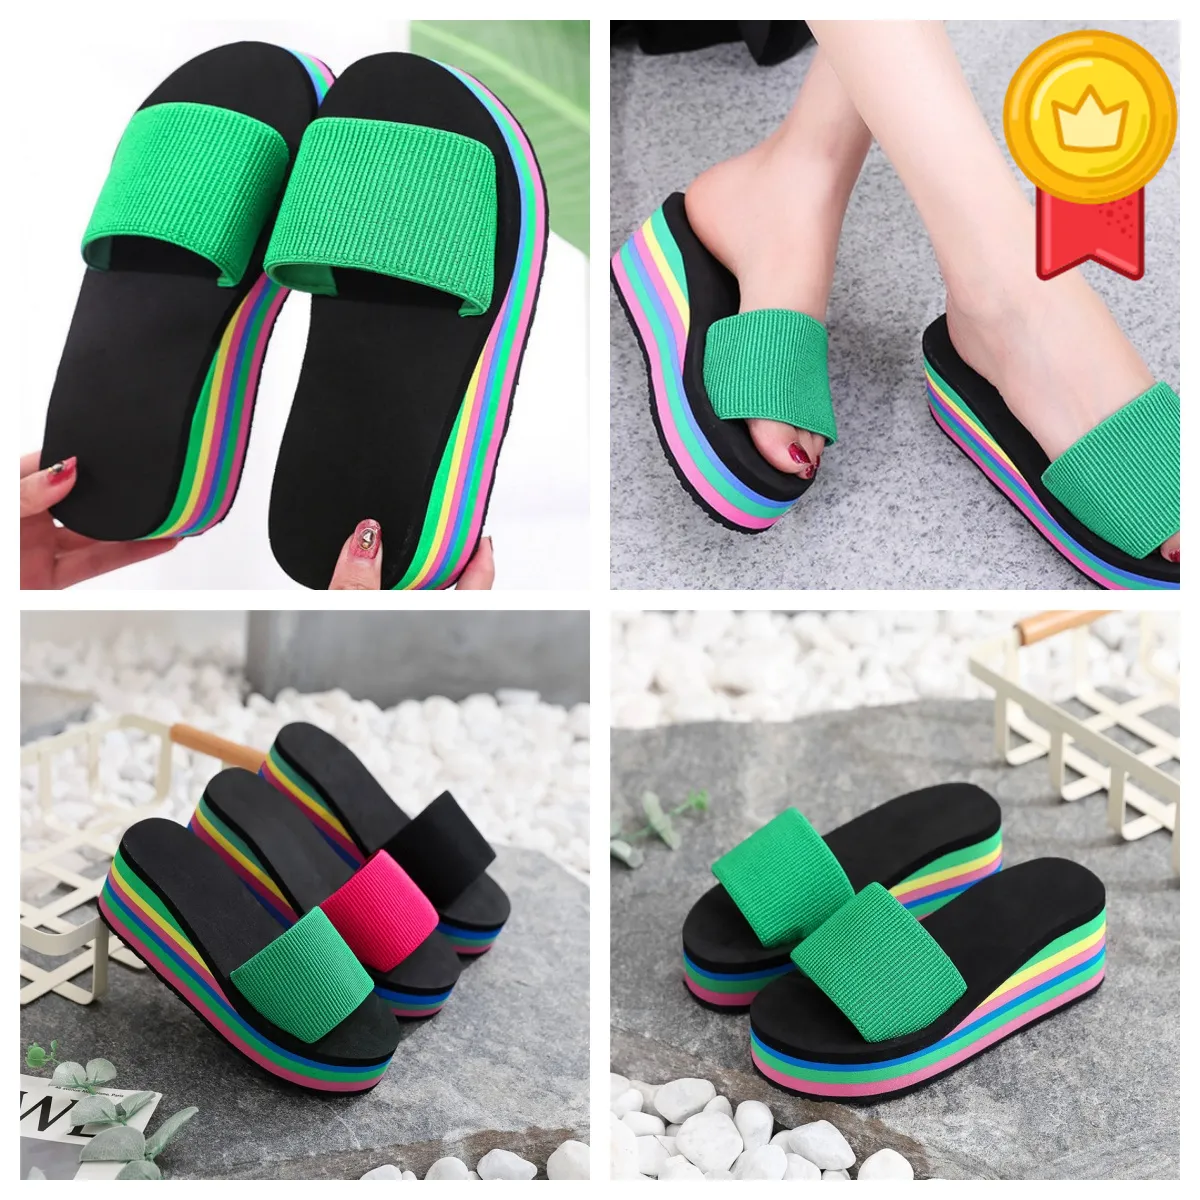 Slippers women's one-sided flip flops summer thick sole sandals outerwear casual beach GAI flip-flo platform black colorful EVA Gladiator soft thick size36-41